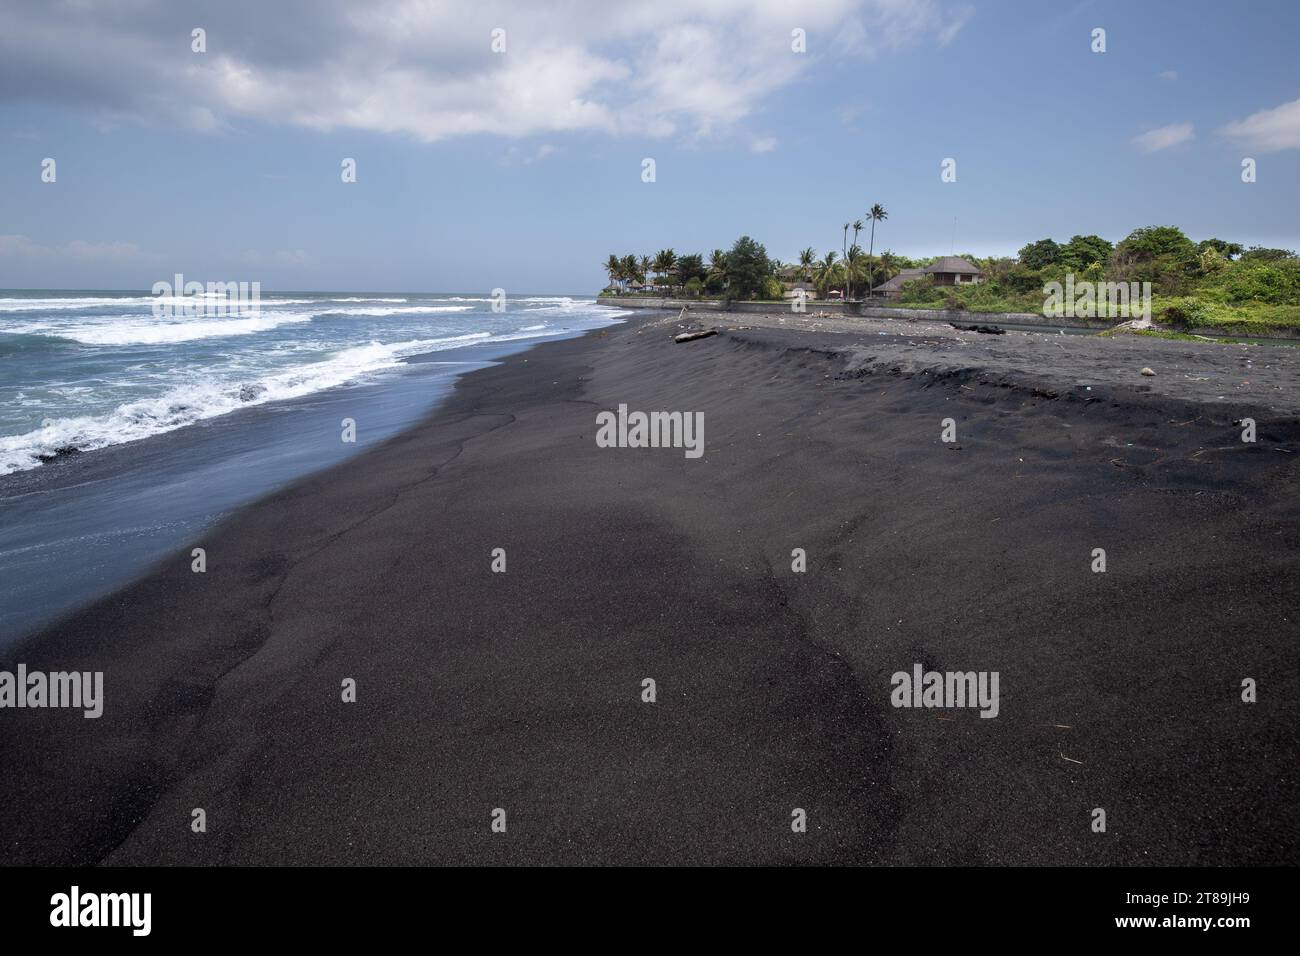 Black sand beach in Bali, natural with temples, boats (jukung) and waves at sunrise. Tropical environment in Indonesia in the morning Stock Photo